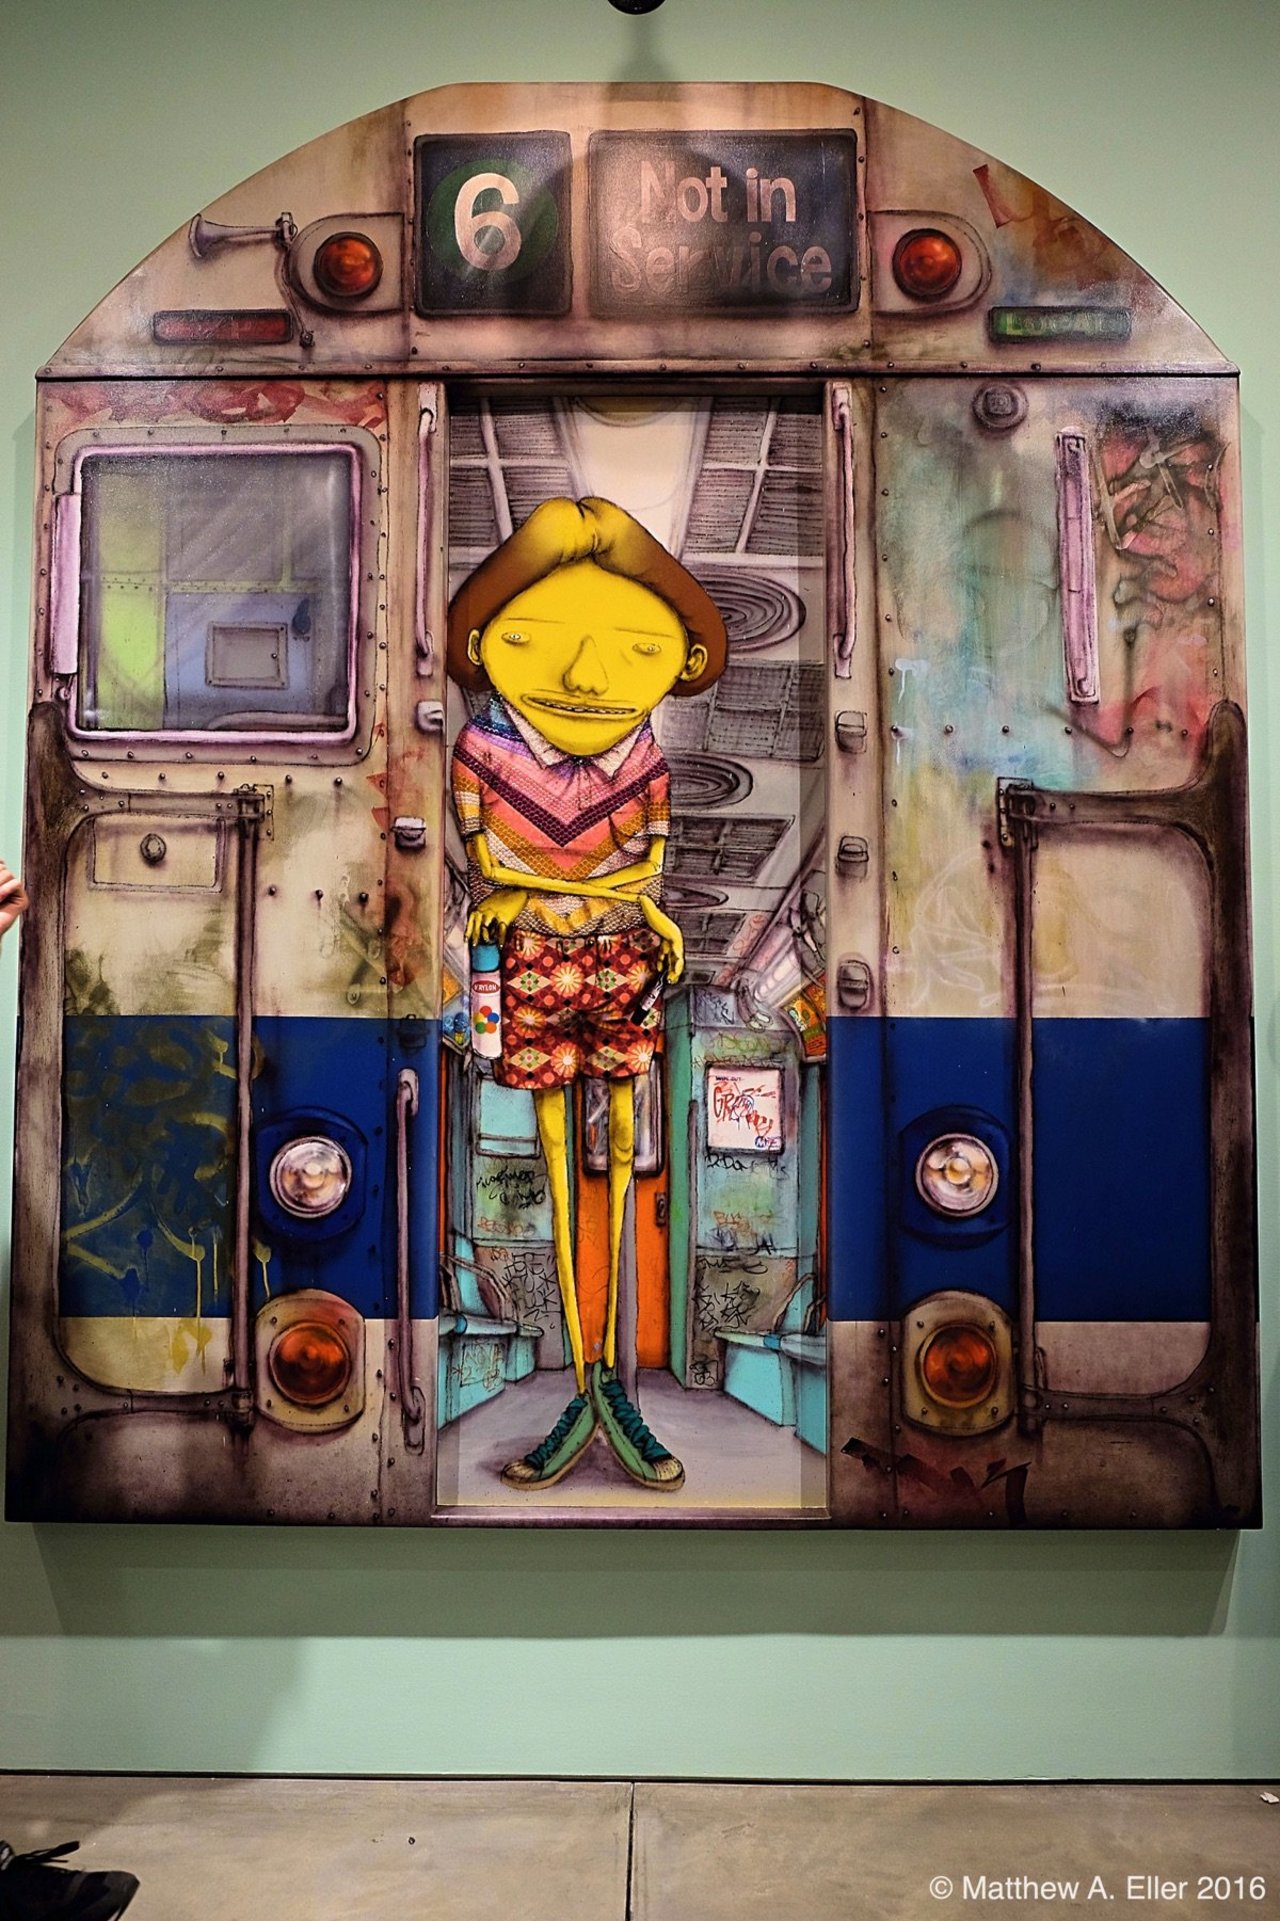 Coverage: Os Gemeos “Silence of the Music” Solo Show @ NYC’s Lehmann Maupin #streetart https://streetartnews.net/2016/09/os-gemeos-silence-of-the-music-opening-party-lehmann-maupin-gallery-nyc.html https://t.co/LP6thxKlke